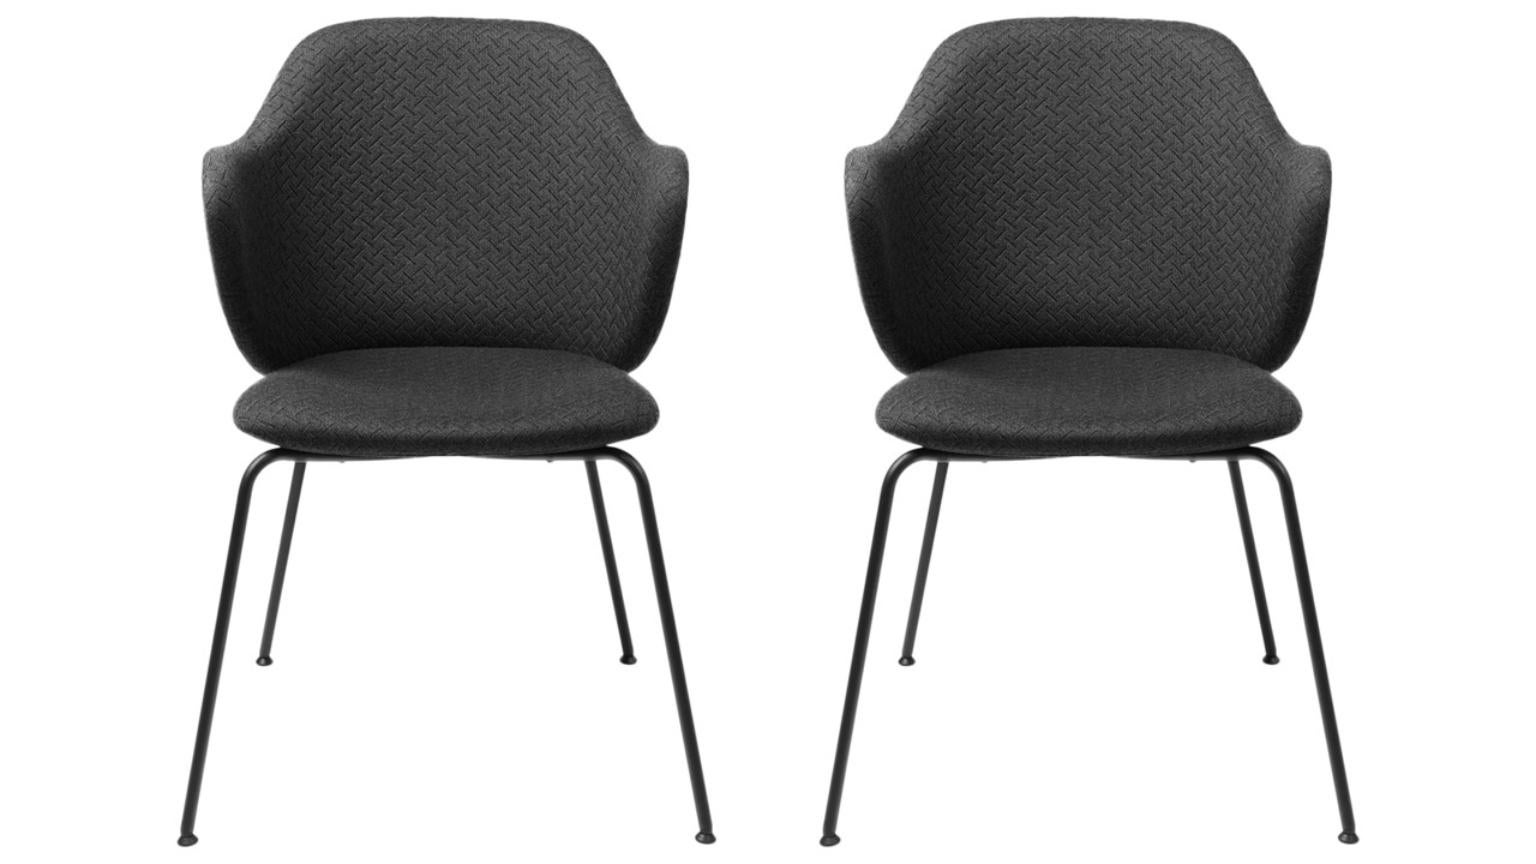 Set of 2 dark grey Jupiter Lassen chairs by Lassen
Dimensions: W 58 x D 60 x H 88 cm 
Materials: Textile

The Lassen Chair by Flemming Lassen, Magnus Sangild and Marianne Viktor was launched in 2018 as an ode to Flemming Lassen’s uncompromising